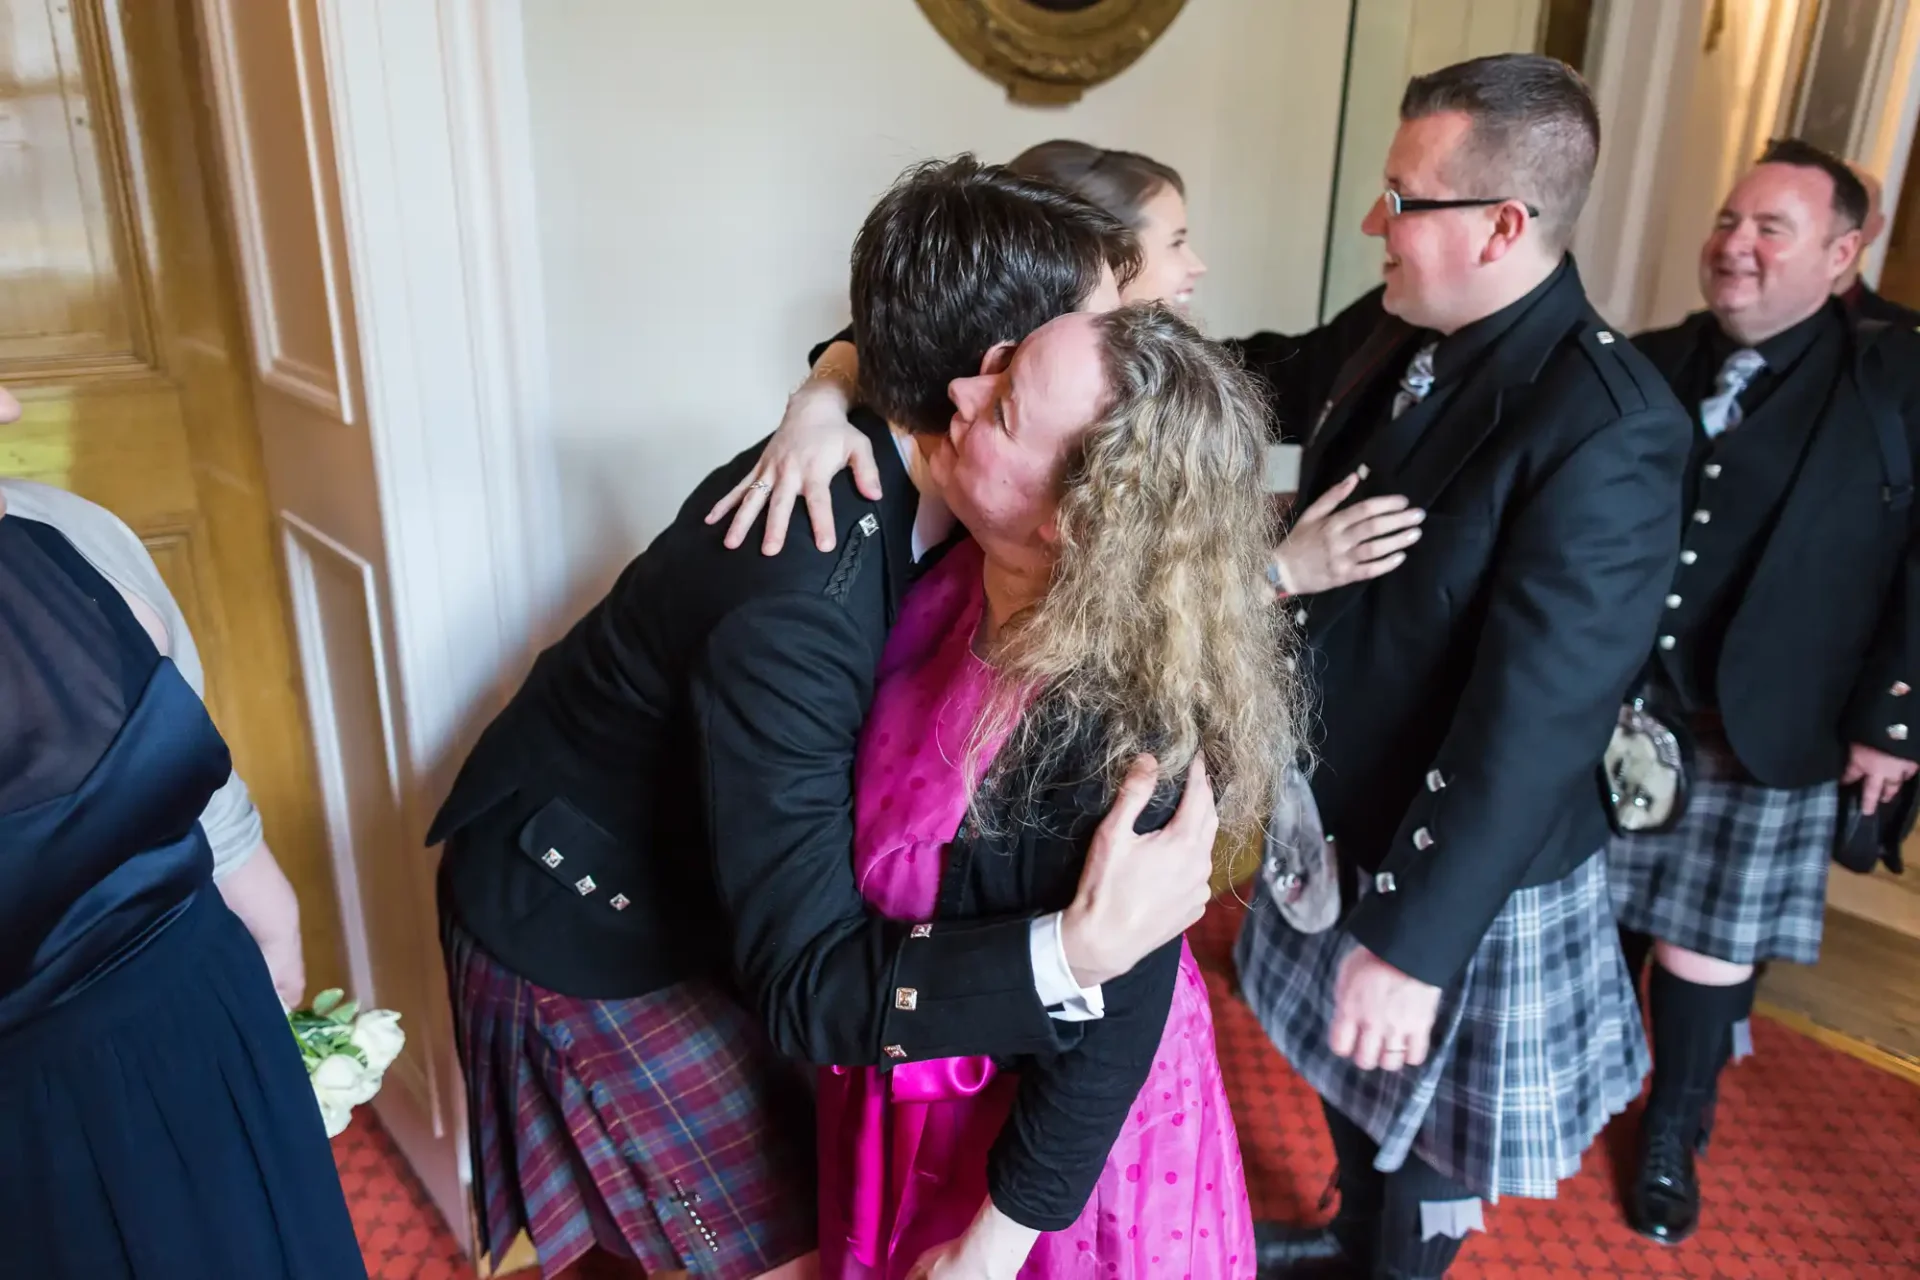 A man in a kilt hugs a woman in a pink dress, both smiling, in a room with others in formal attire, some also wearing kilts.